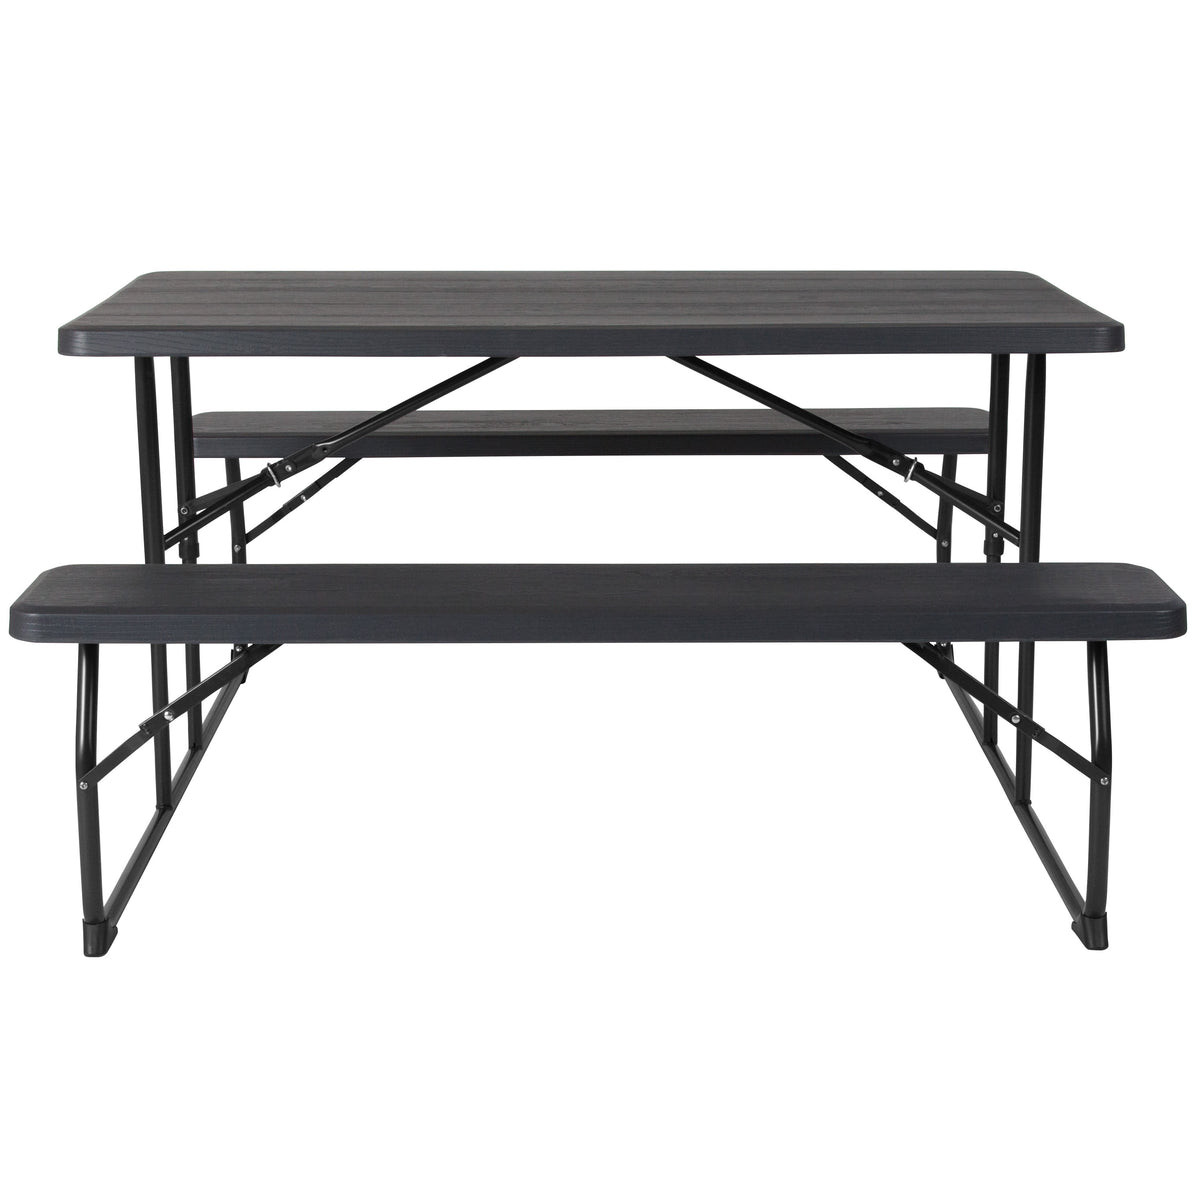 Charcoal |#| All-In-One Folding Picnic Table and Bench Set - Adult Size, Charcoal Wood Grain